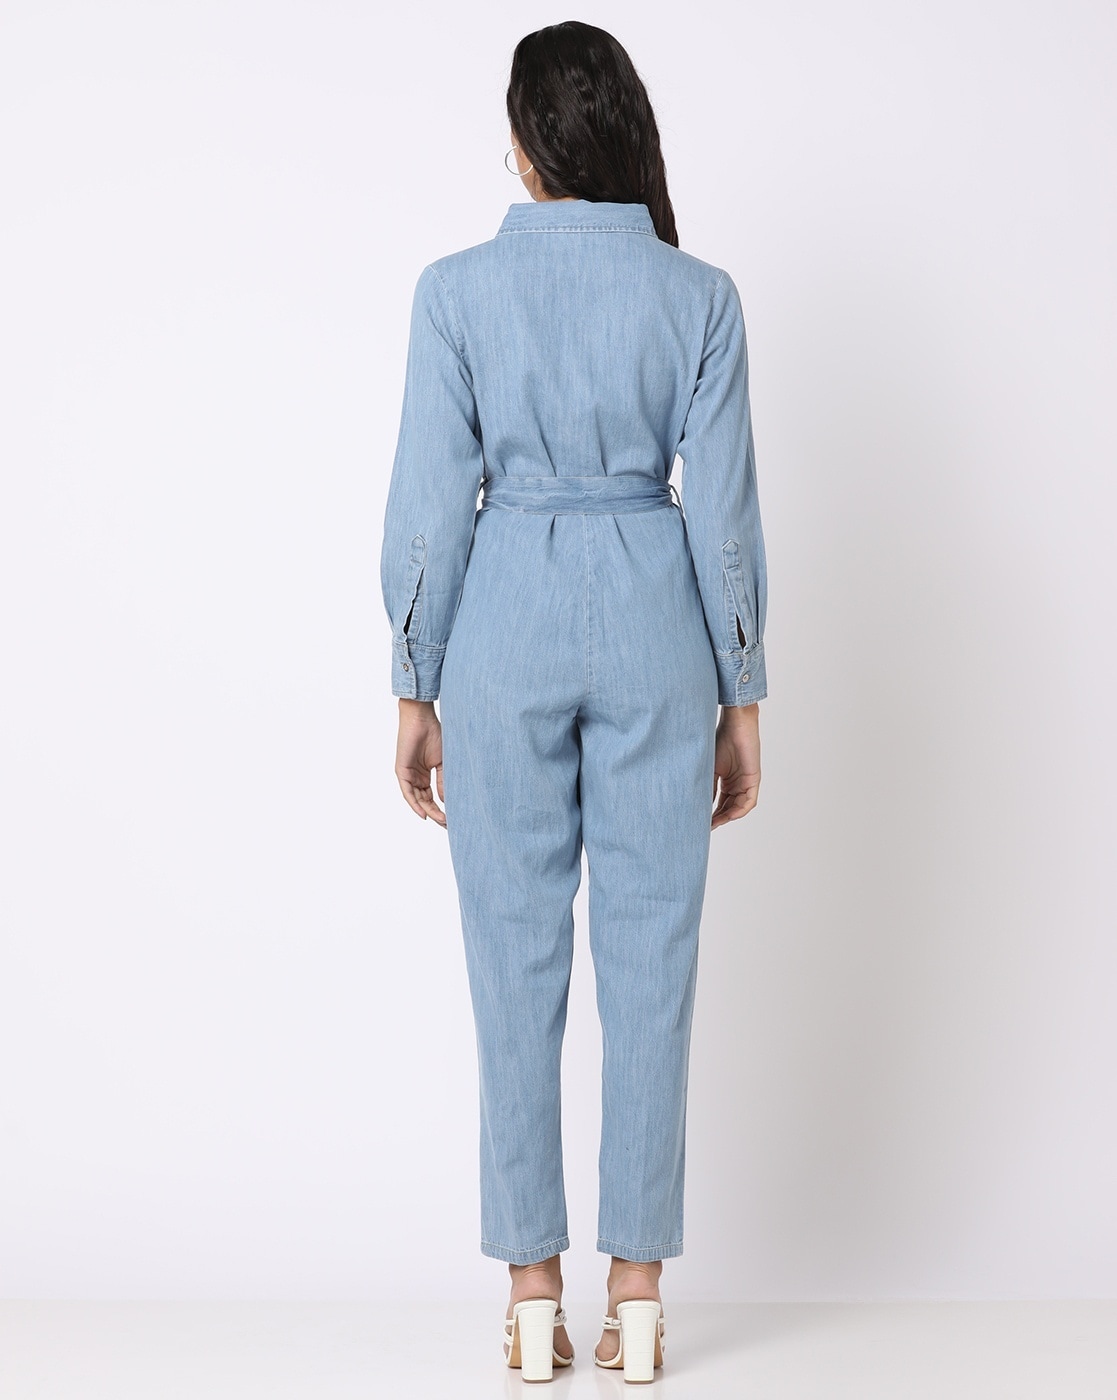 Buy Teal Jumpsuits &Playsuits for Women by The Dry State Online | Ajio.com